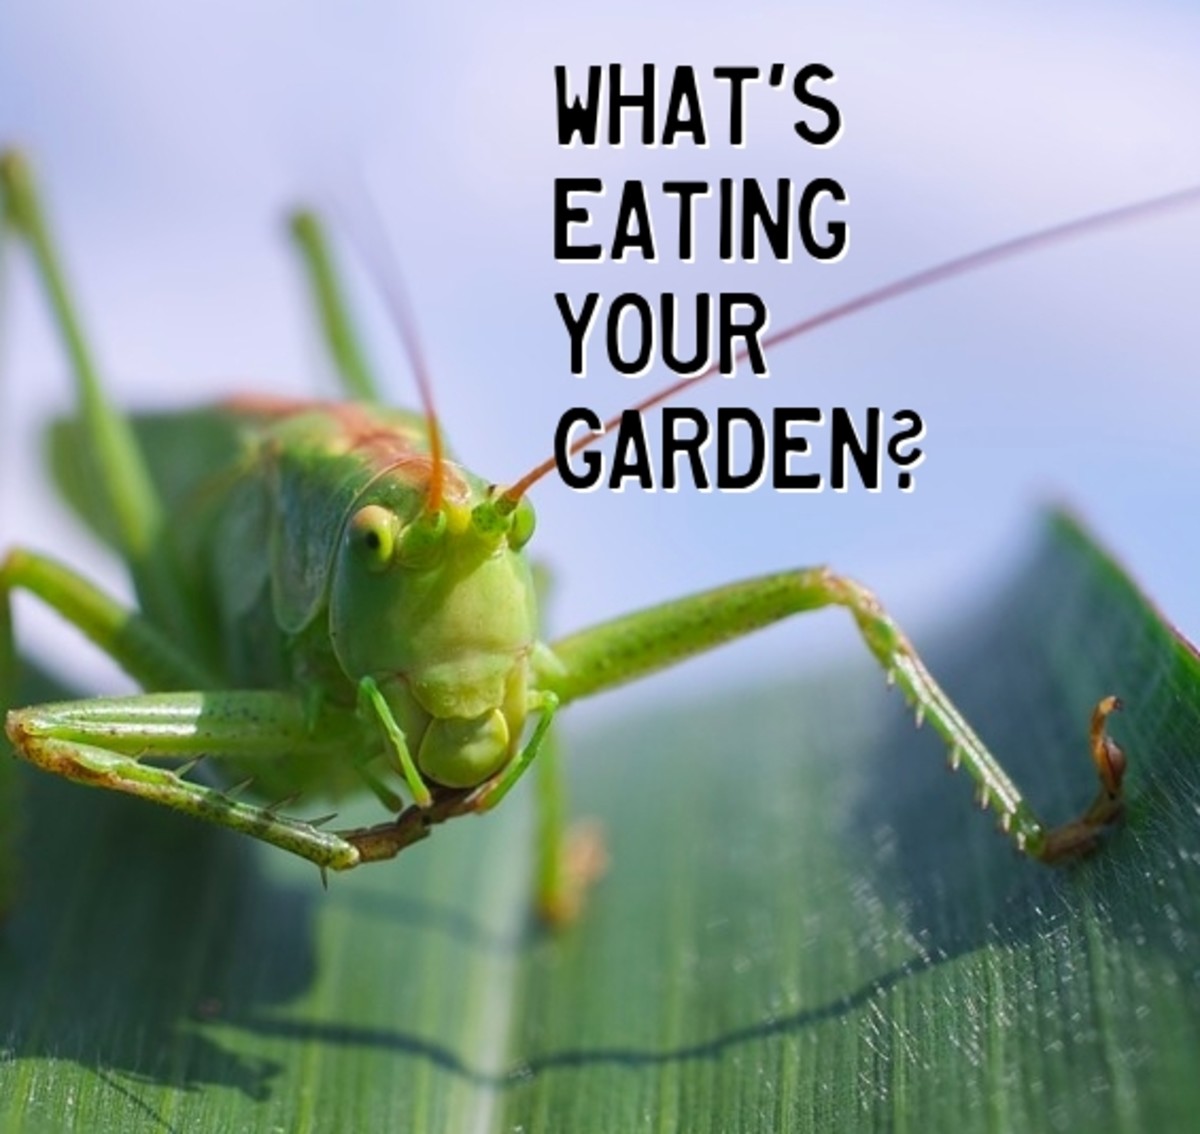 What's Eating Your Garden? How to Identify Common Leaf-Eating Pests